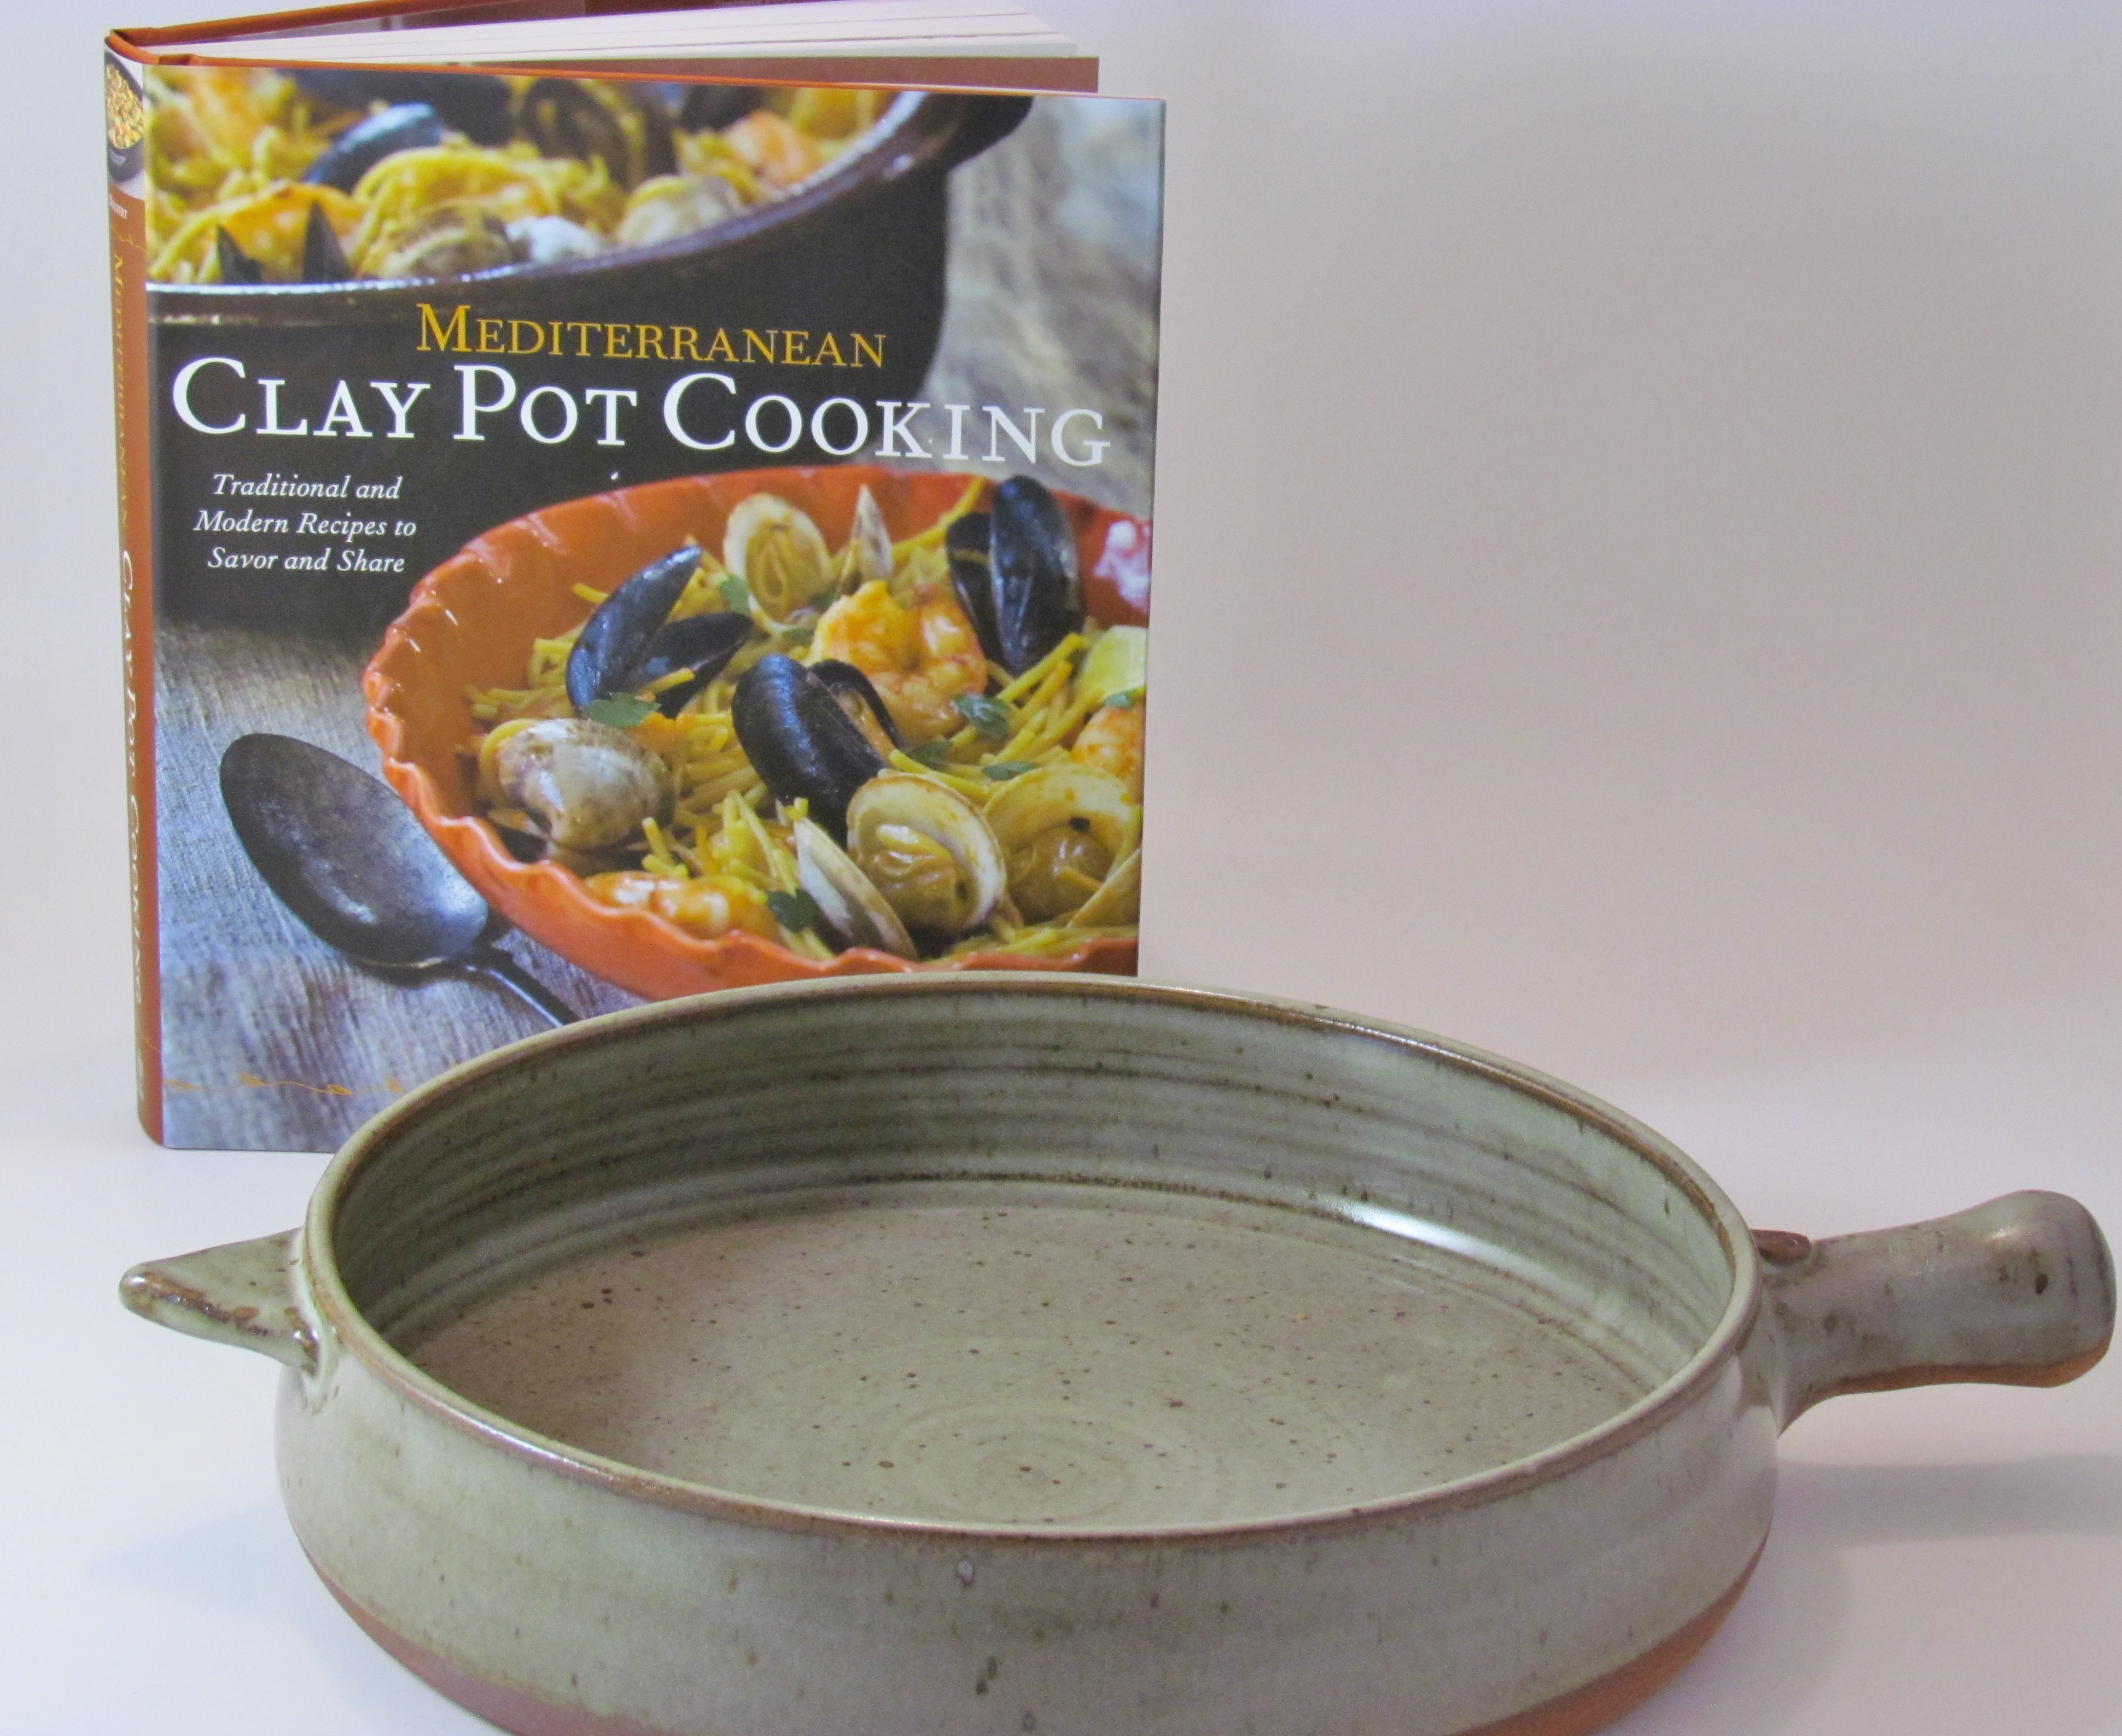 https://www.claycoyote.com/wp-content/uploads/2018/03/cazuela-and-clay-pot-cooking.jpg